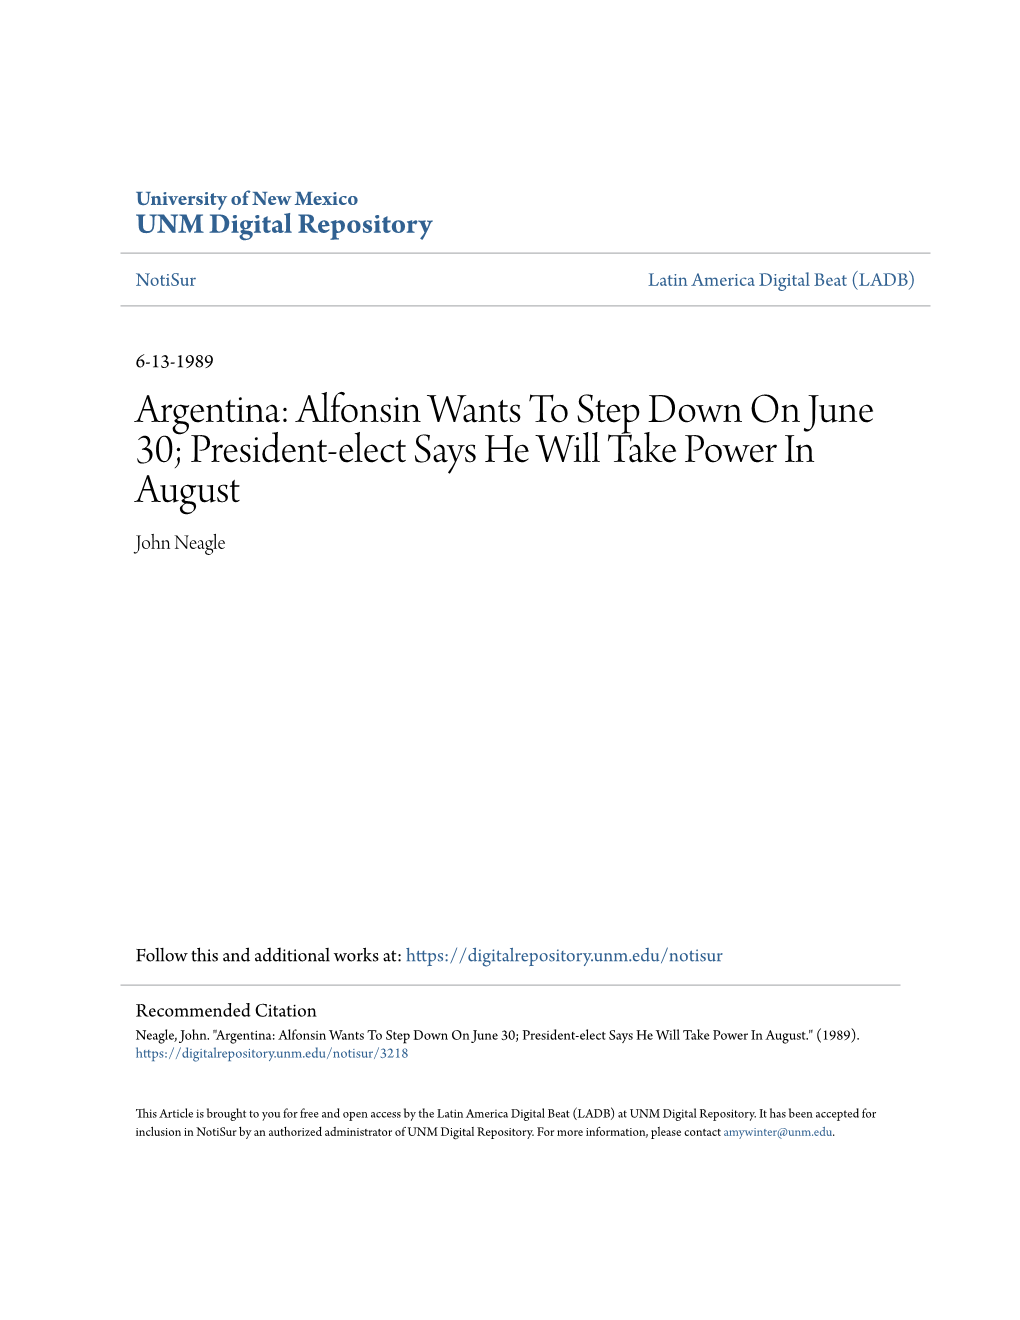 Argentina: Alfonsin Wants to Step Down on June 30; President-Elect Says He Will Take Power in August John Neagle